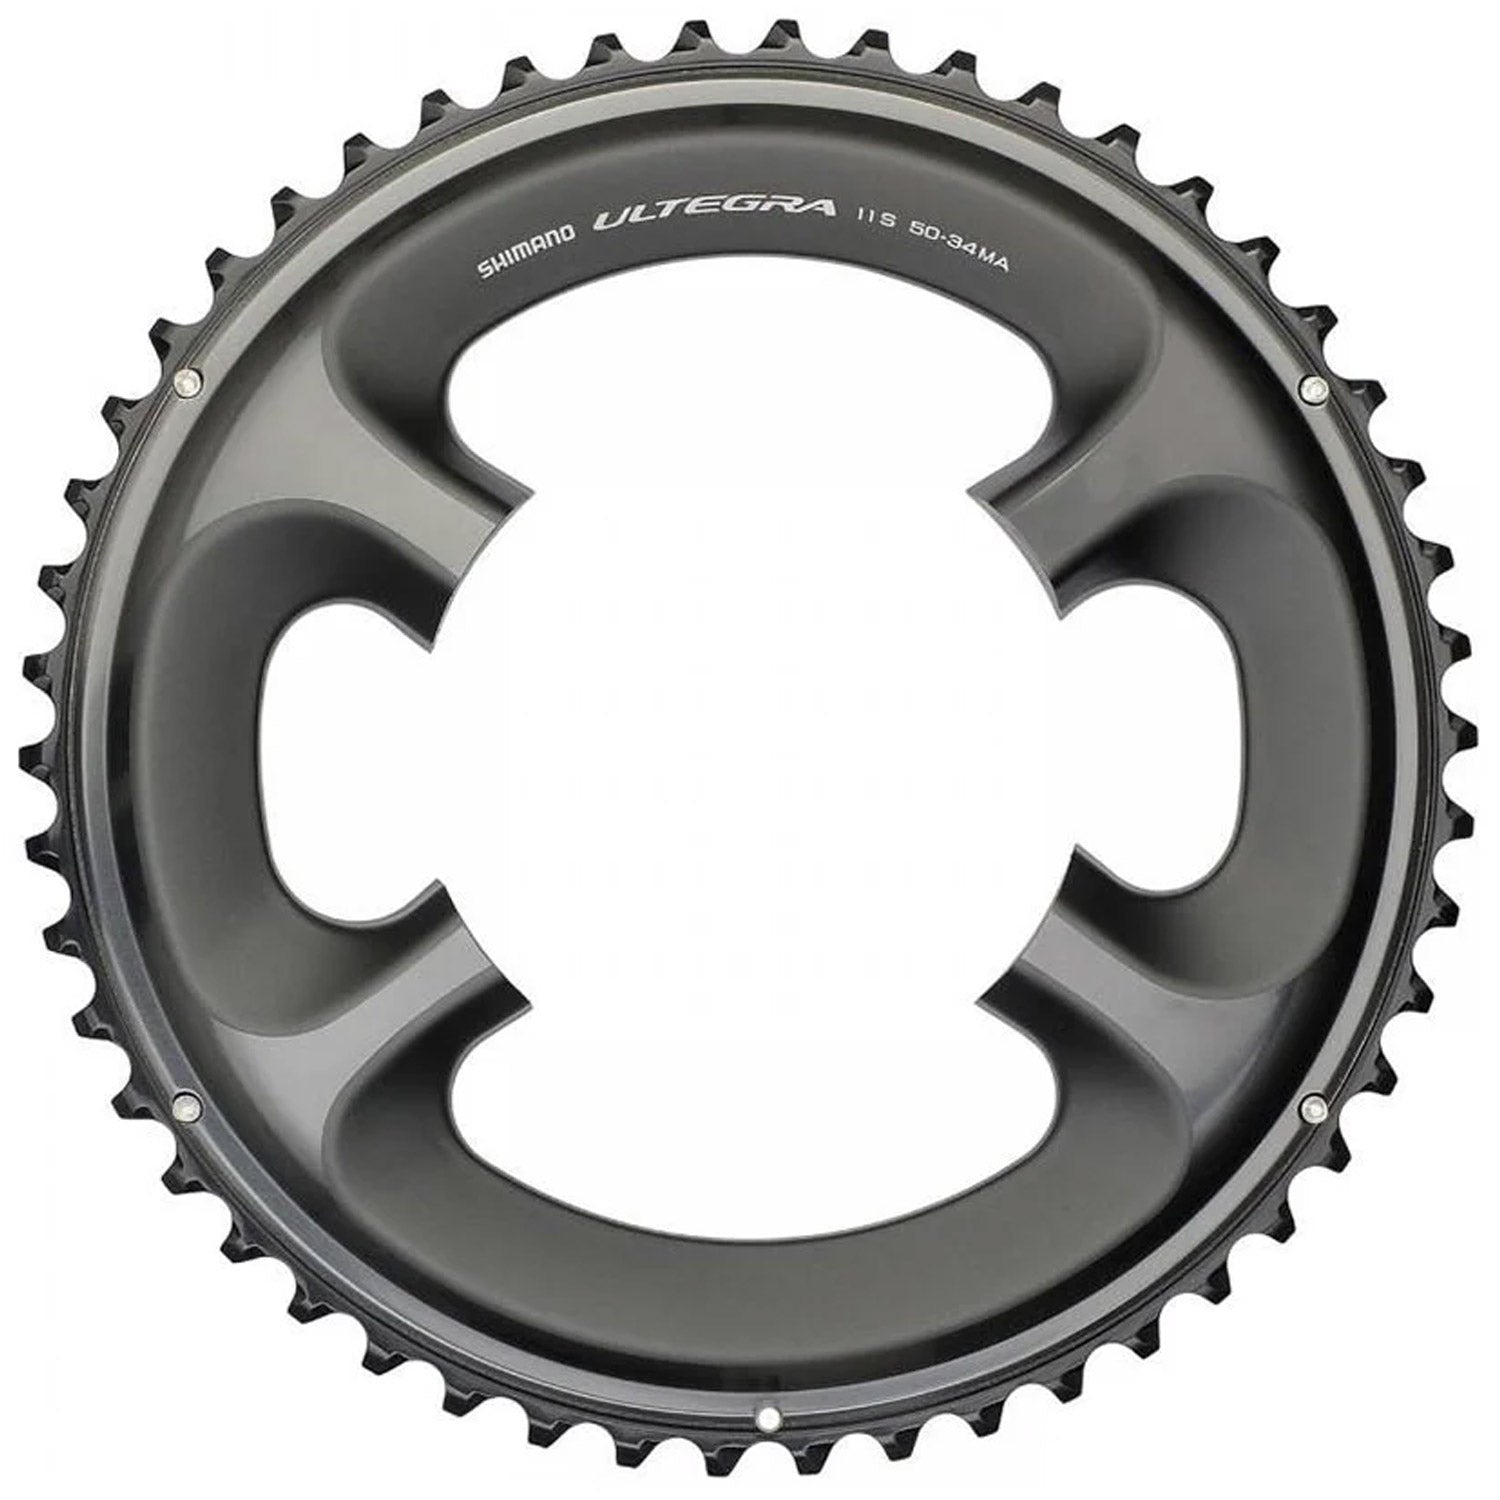 Shimano Ultegra FC-6800 MB chainring - 52T All4cycling